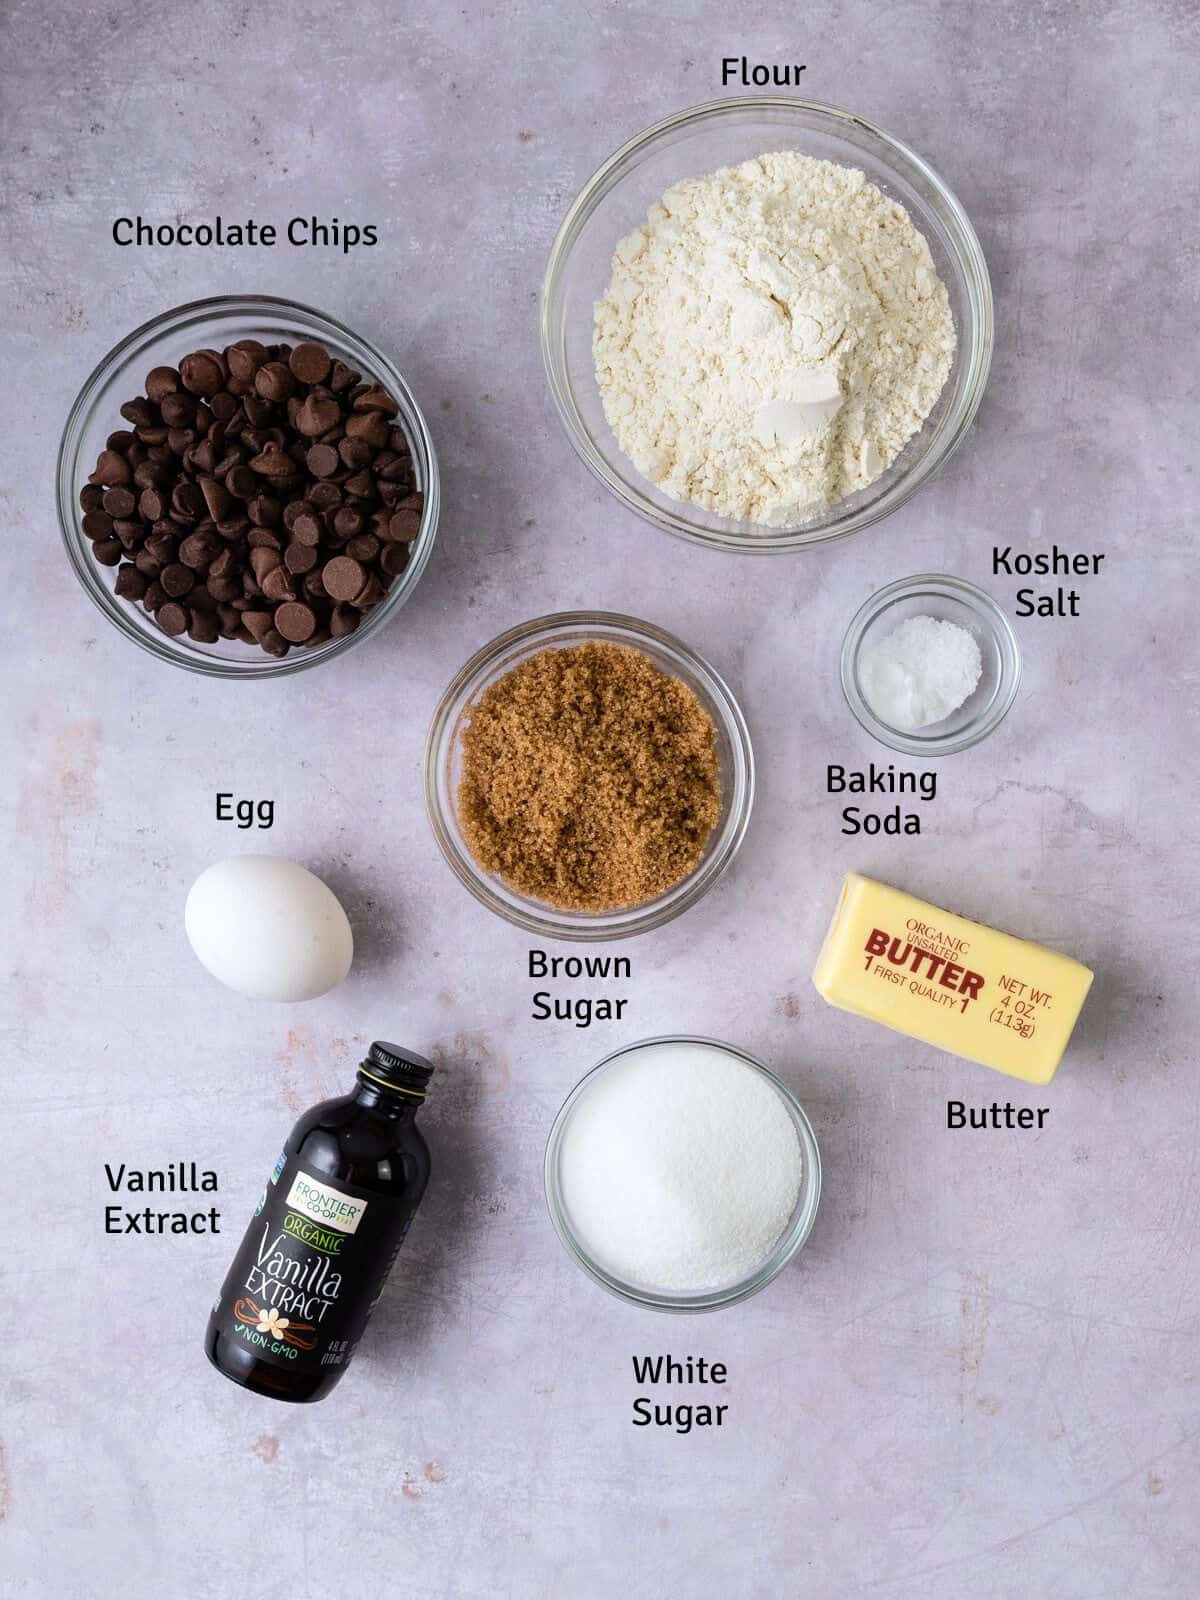 Ingredients for skillet chocolate chip cookie including brown sugar, vanilla extract and chocolate chips.